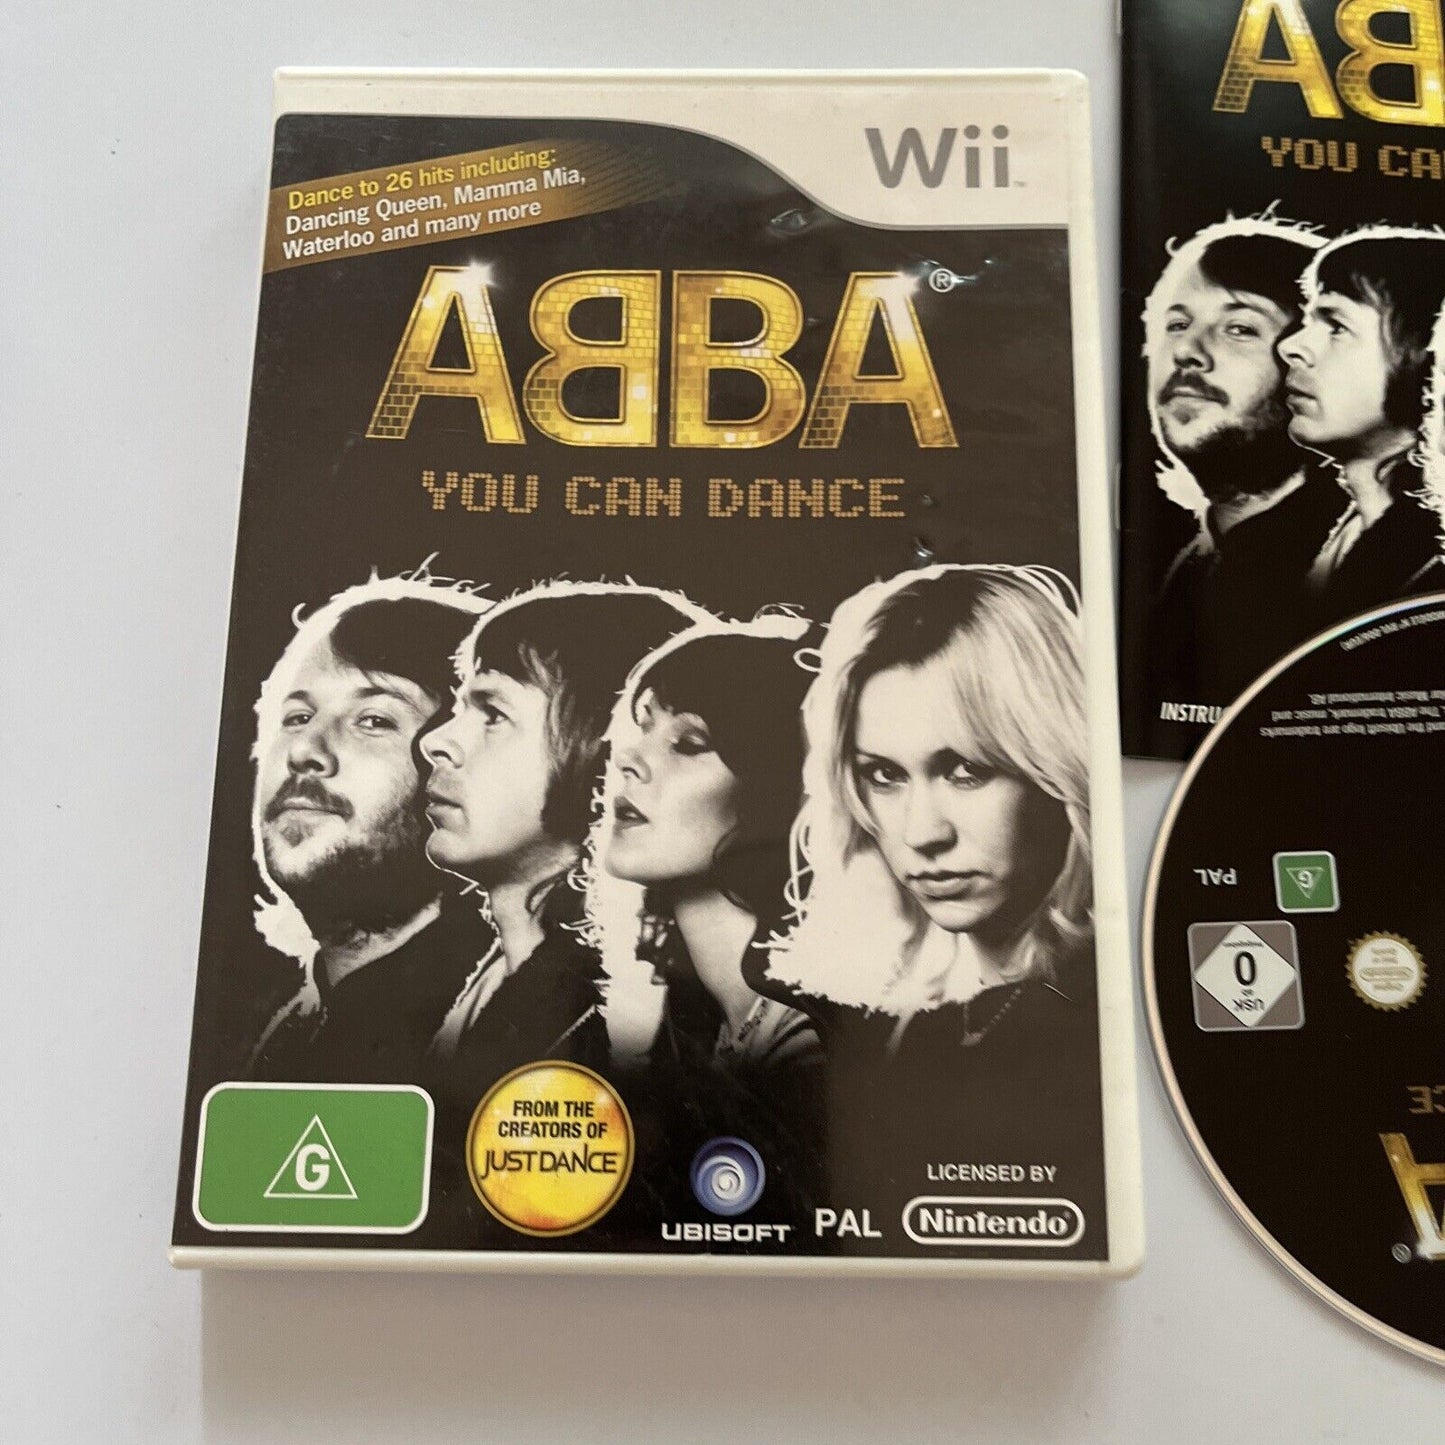 ABBA - You Can Dance Nintendo Wii Includes Manual PAL